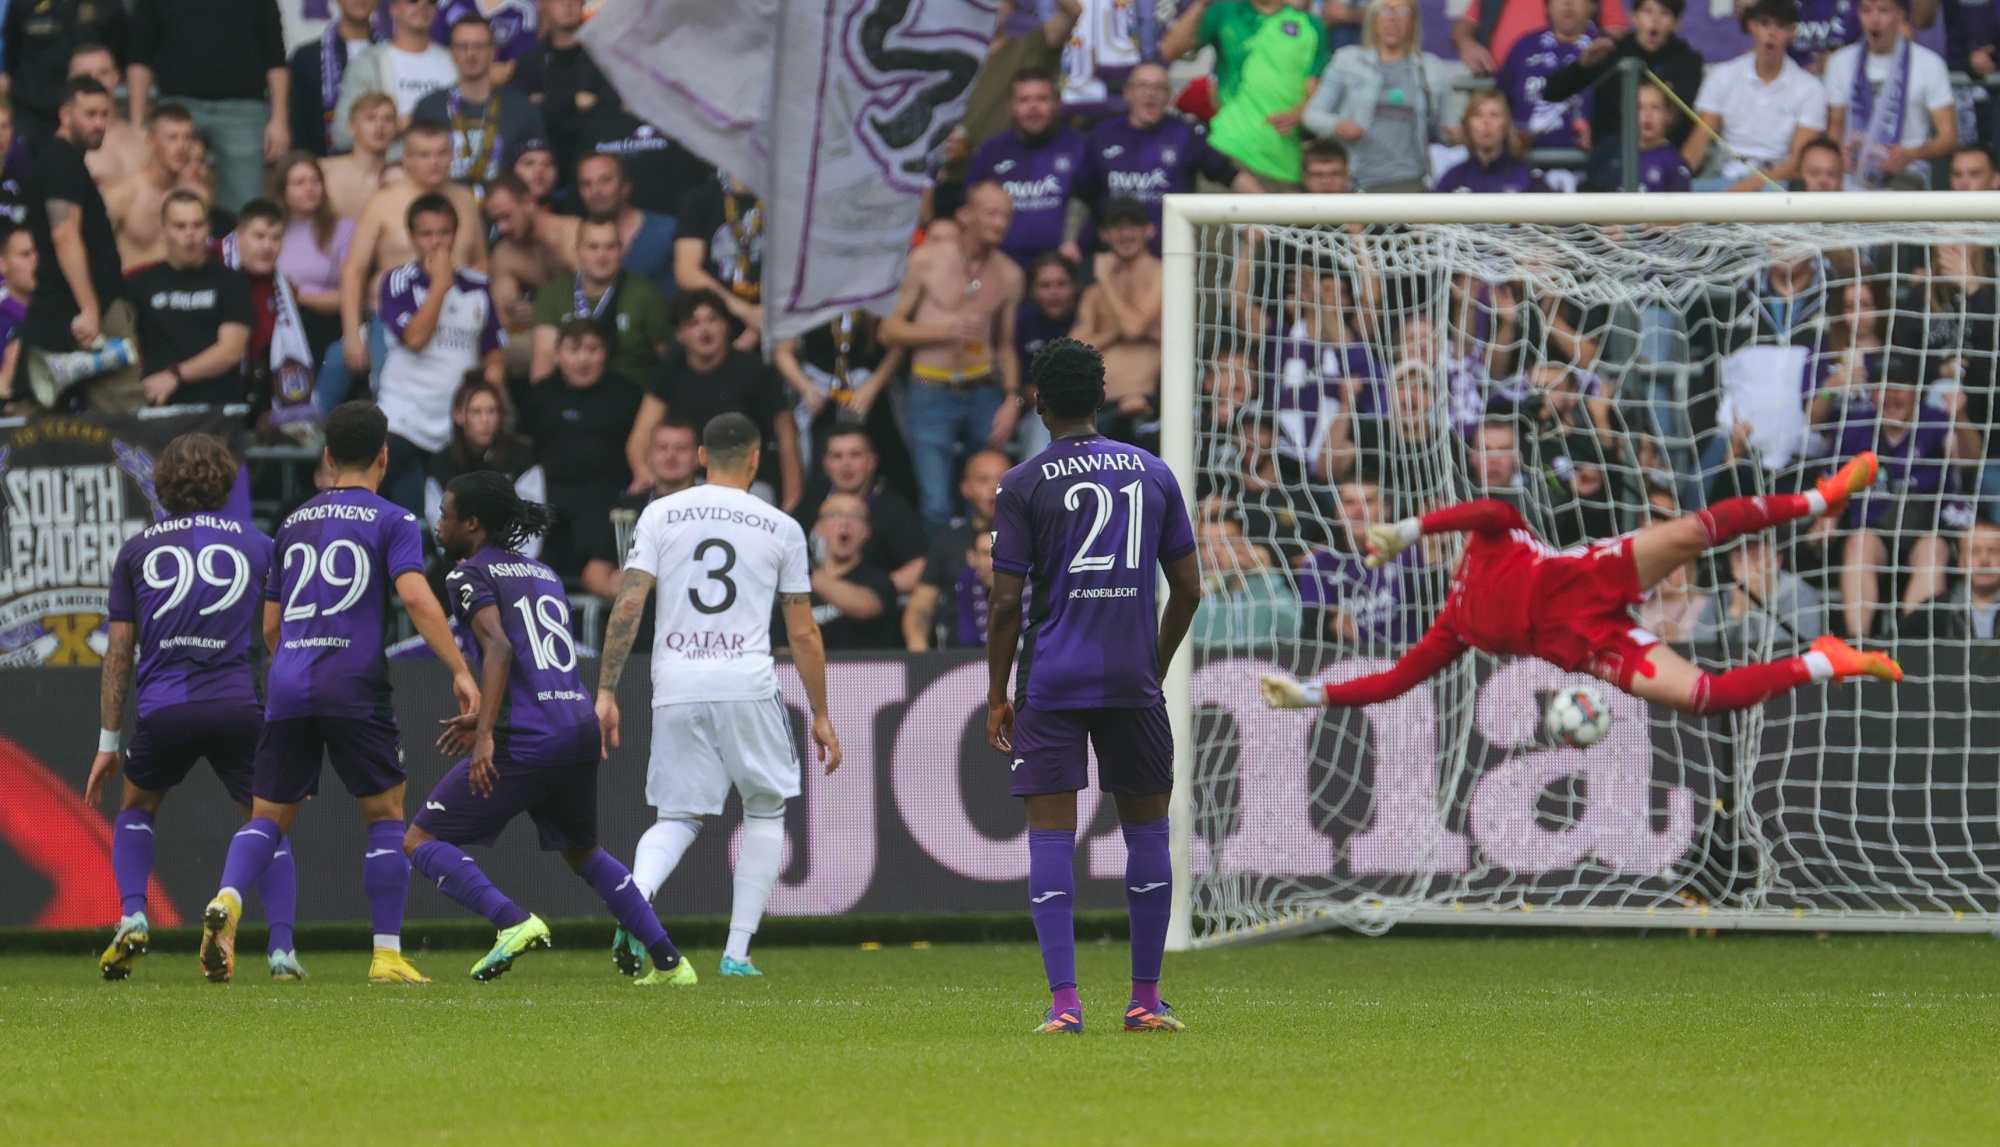 Anderlecht's Lior Refaelov scoring the 2-0 goal during a soccer match between RSC Anderlecht and KAS Eupen, Sunday 30 October 2022 in Anderlecht, Brussels, on day 15 of the 2022-2023 'Jupiler Pro League' first division of the Belgian championship. BELGA PHOTO VIRGINIE LEFOUR